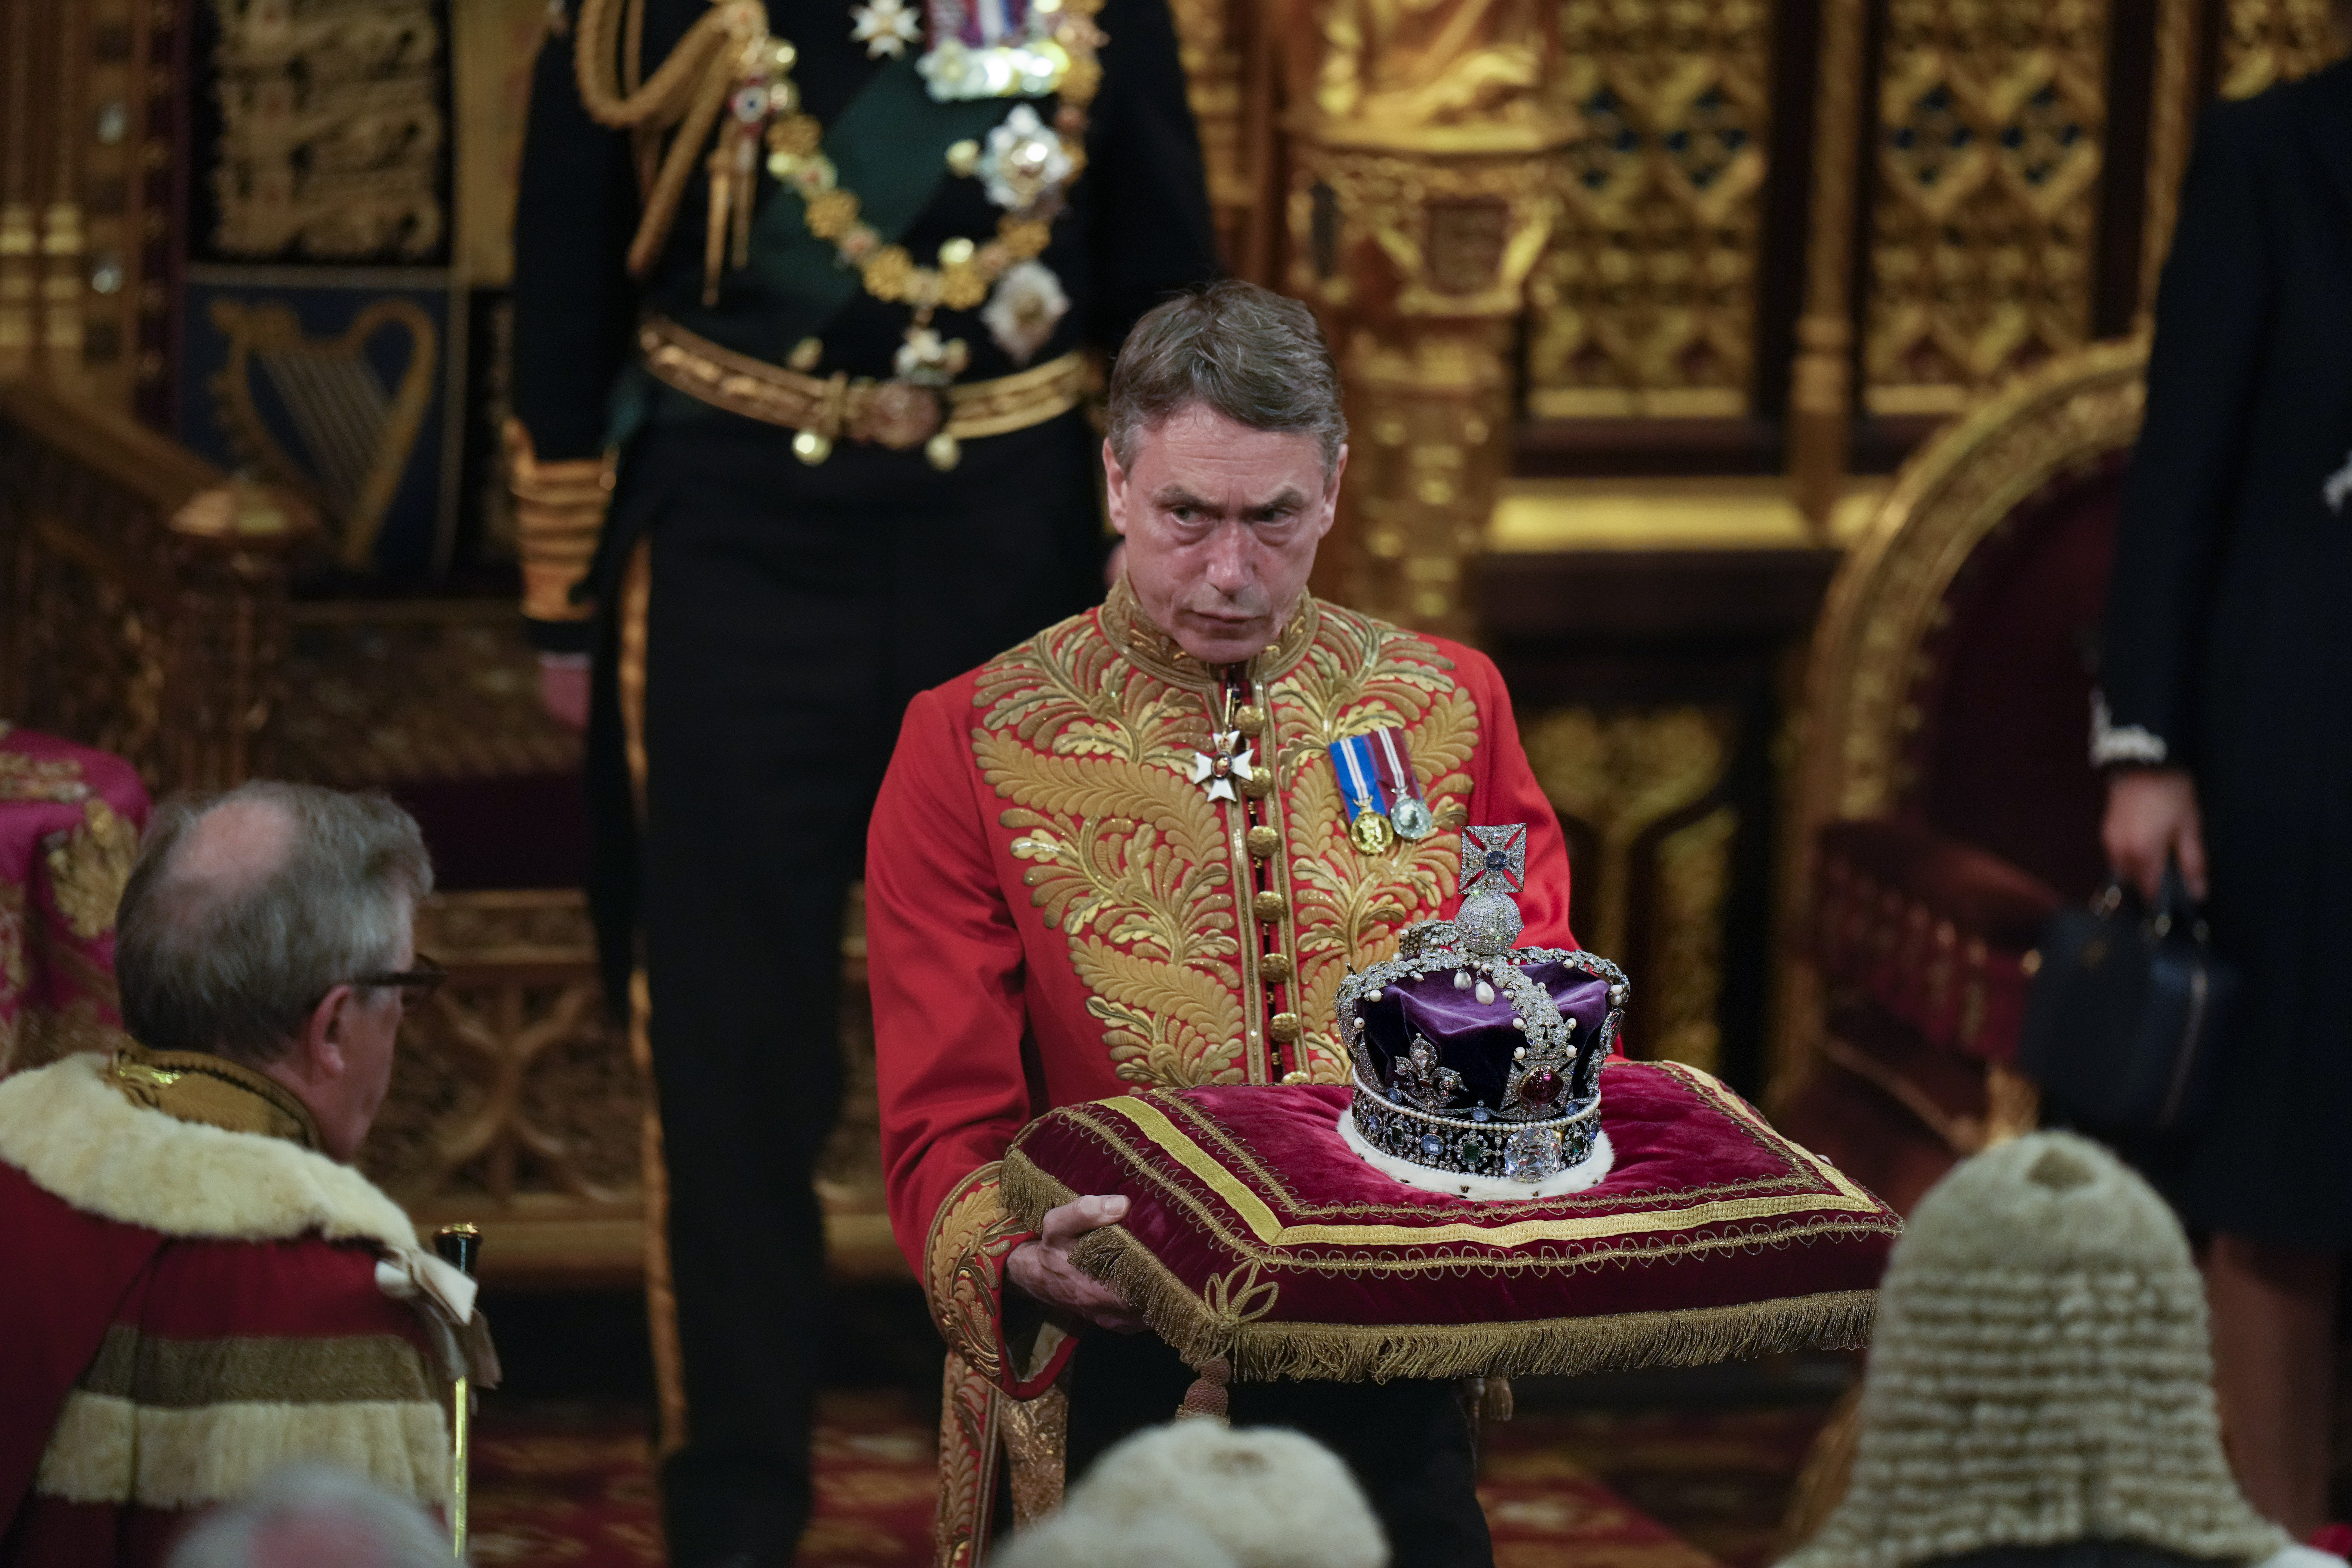 The Imperial State Crown being carried at the 2022 opening of parliament